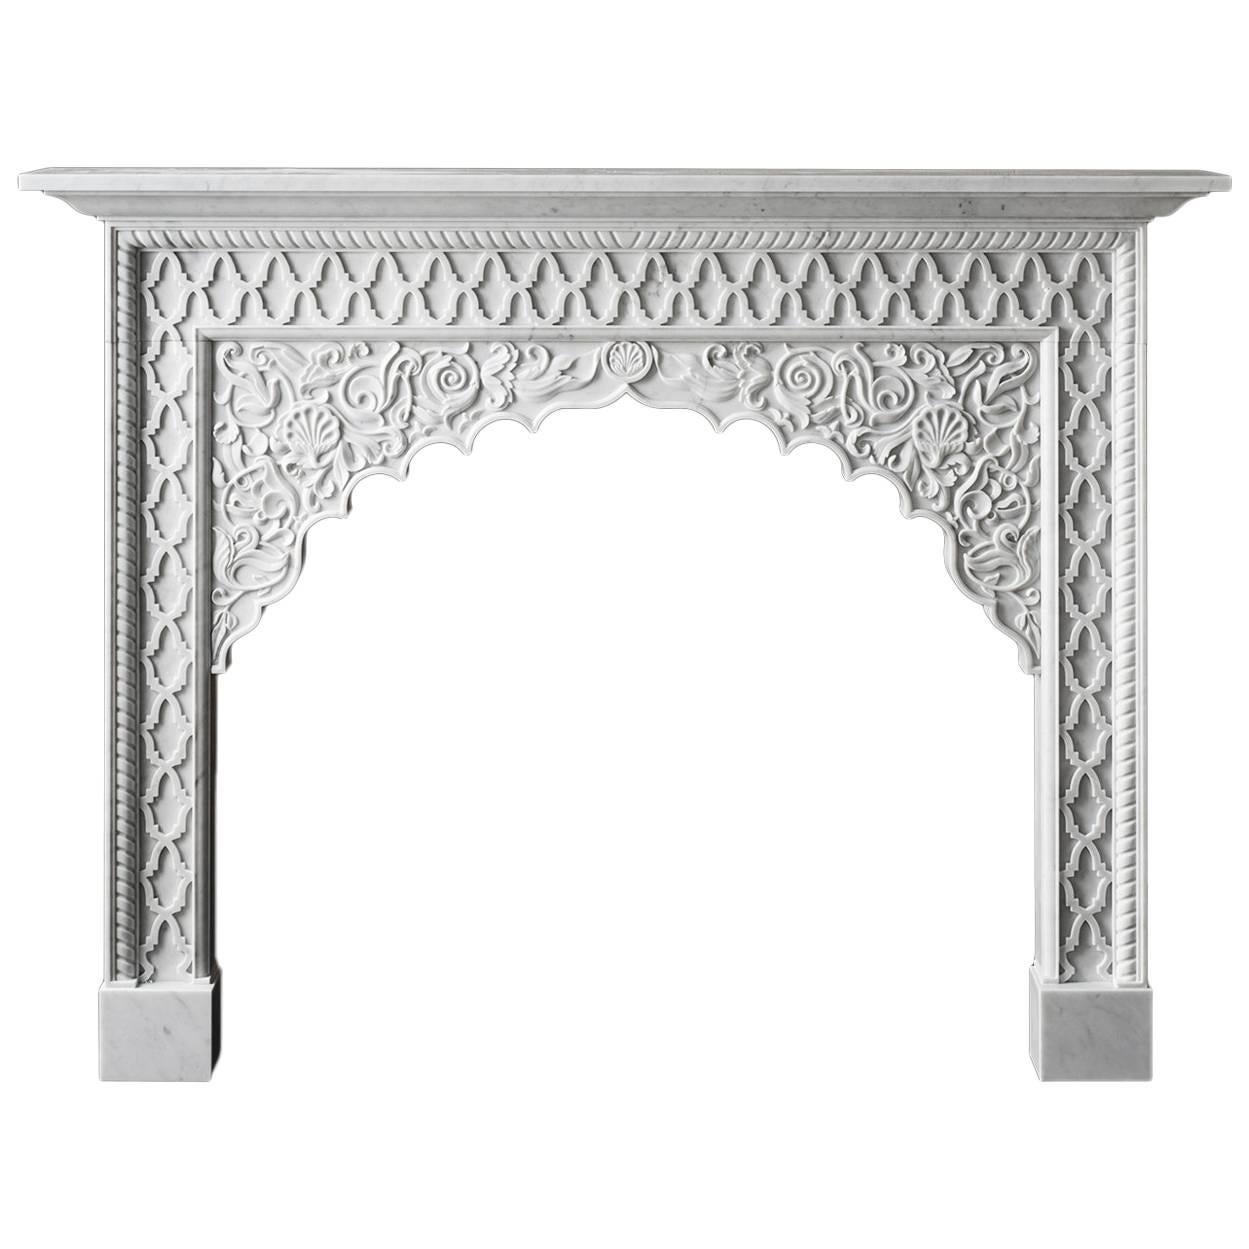 21st Century Reproduction Moroccan Mantel Carved in Marble